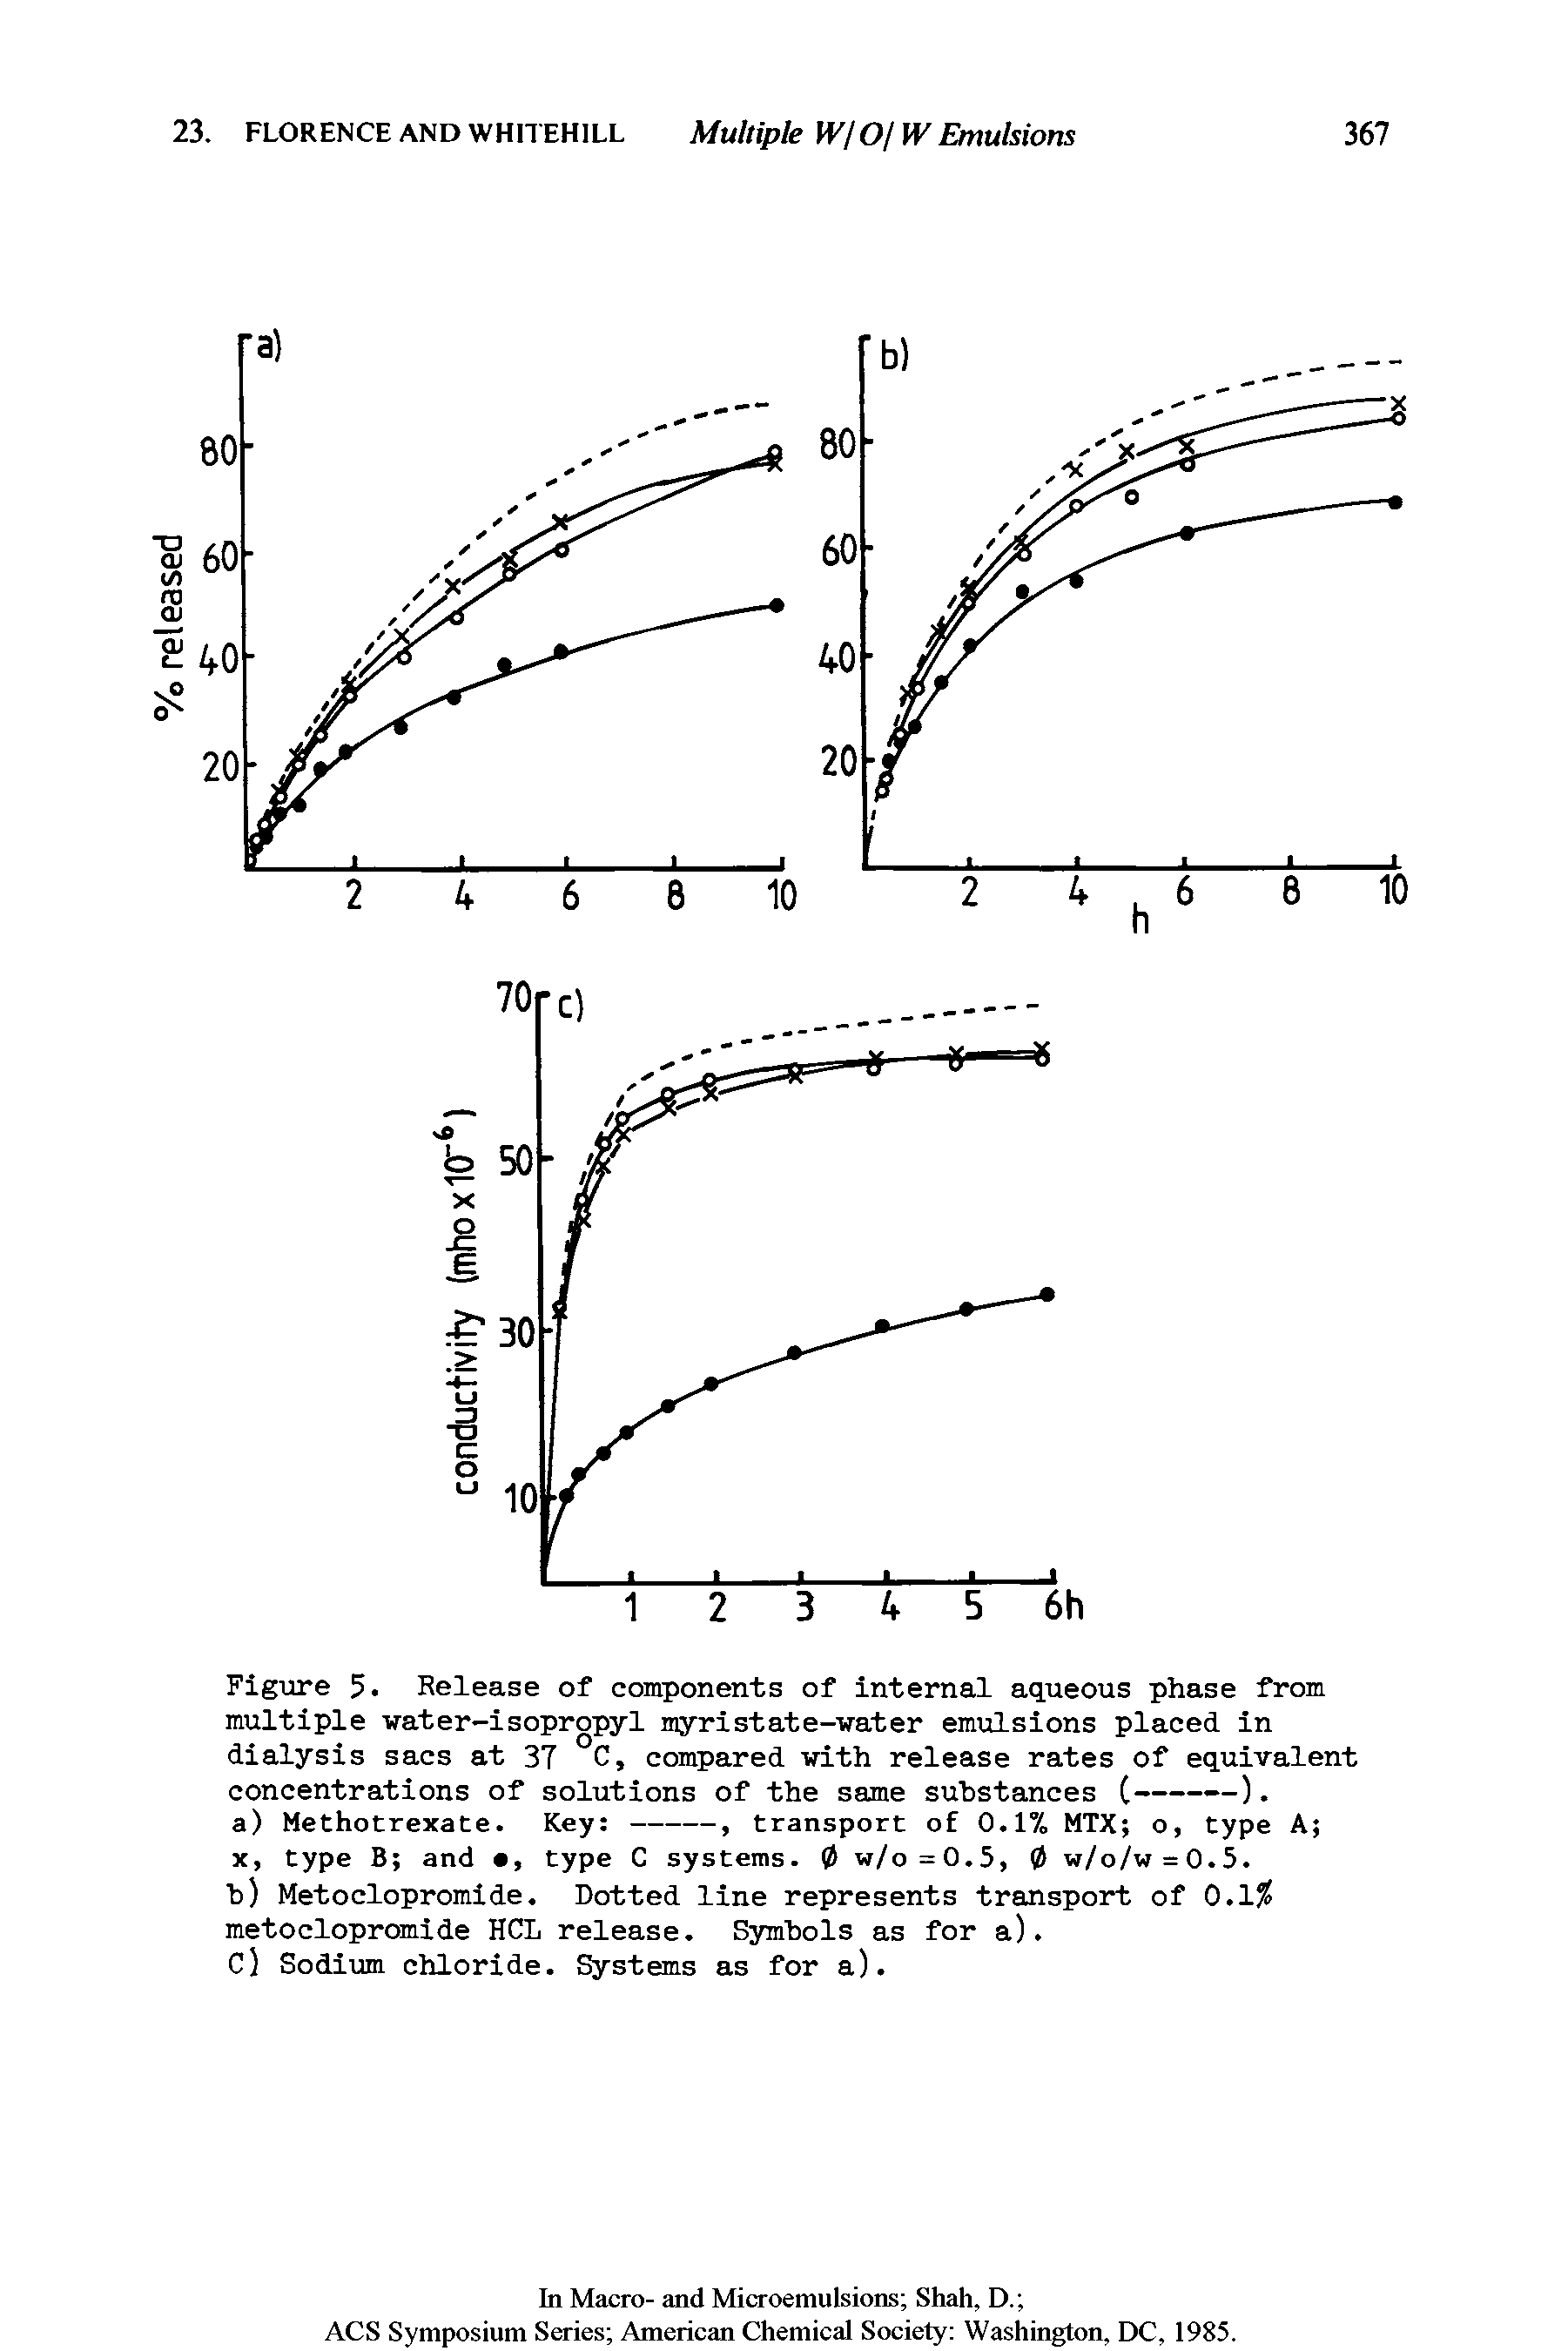 Figure 5. Release of components of internal aqueous phase from multiple water-isopropyl myristate-water emulsions placed in dialysis sacs at 37 C, compared with release rates of equivalent concentrations of solutions of the same substances (----—).